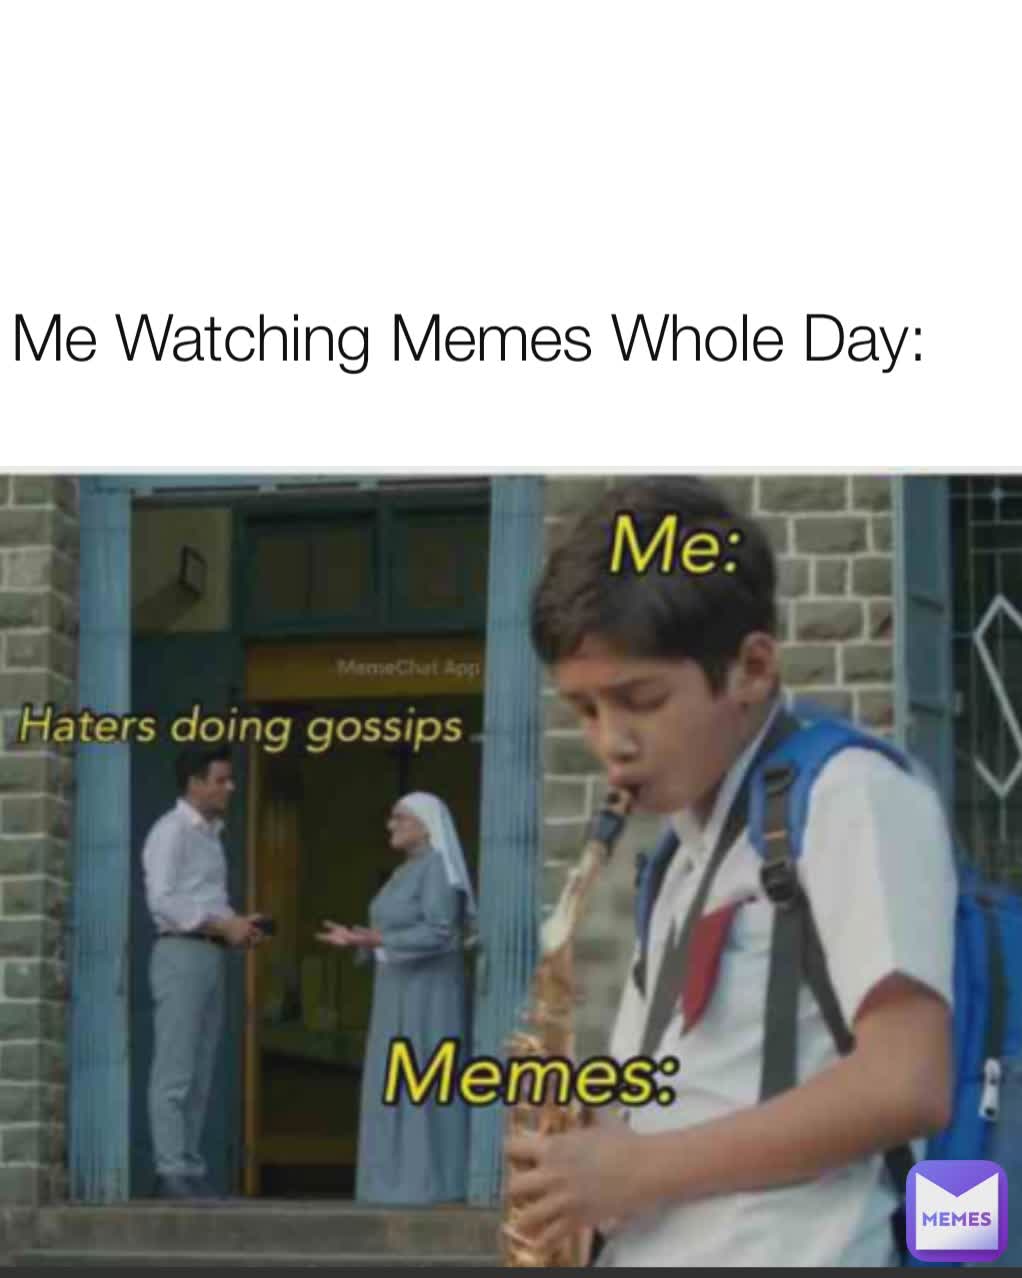  Me Watching Memes Whole Day: 